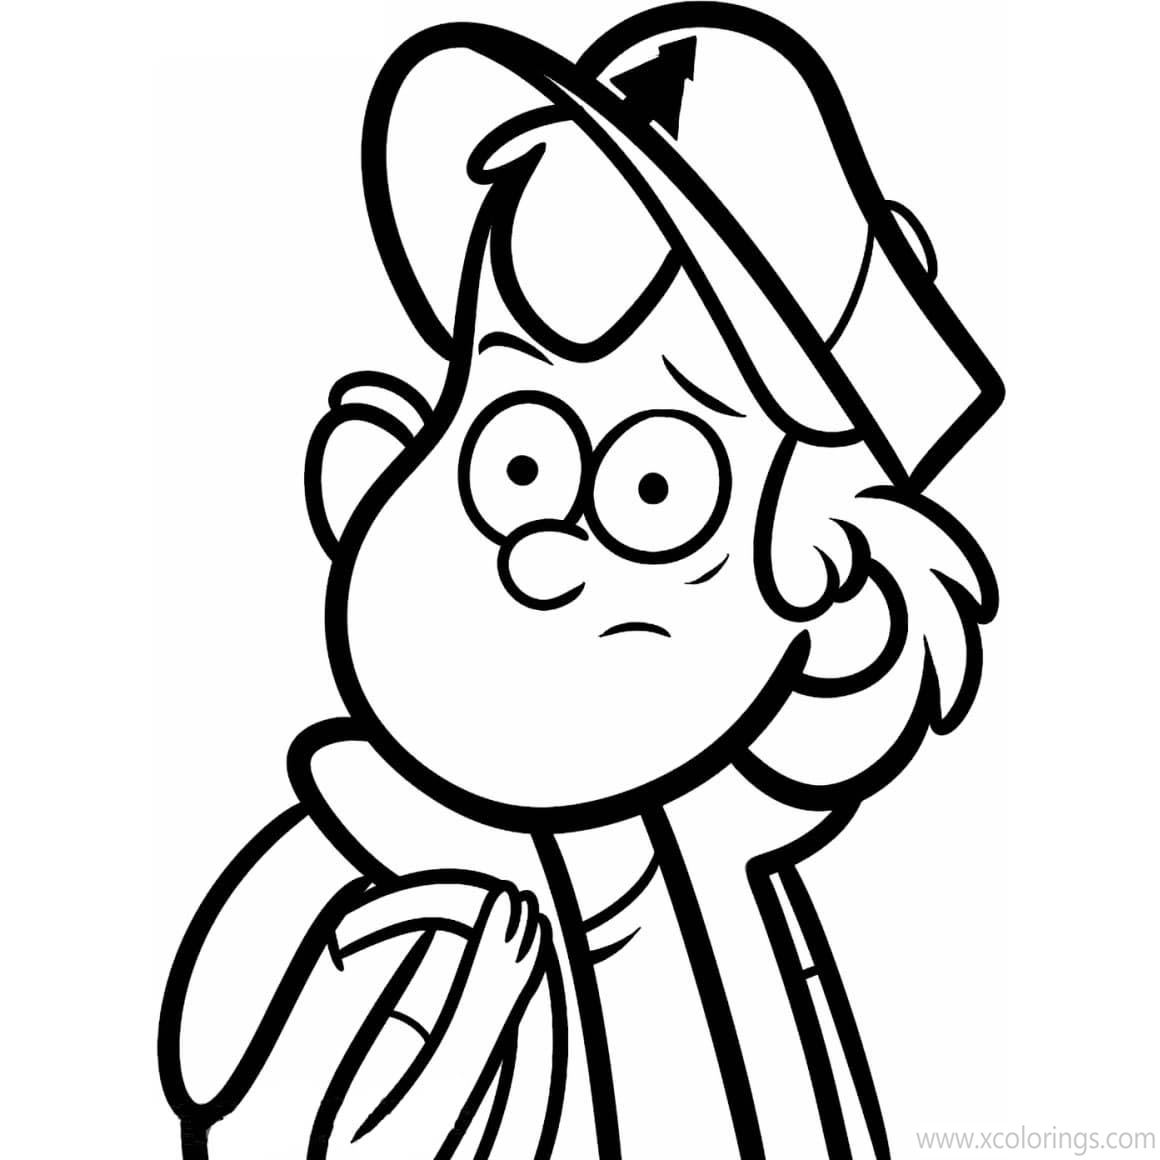 Free Gravity Falls Coloring Pages Dipper with Bag printable